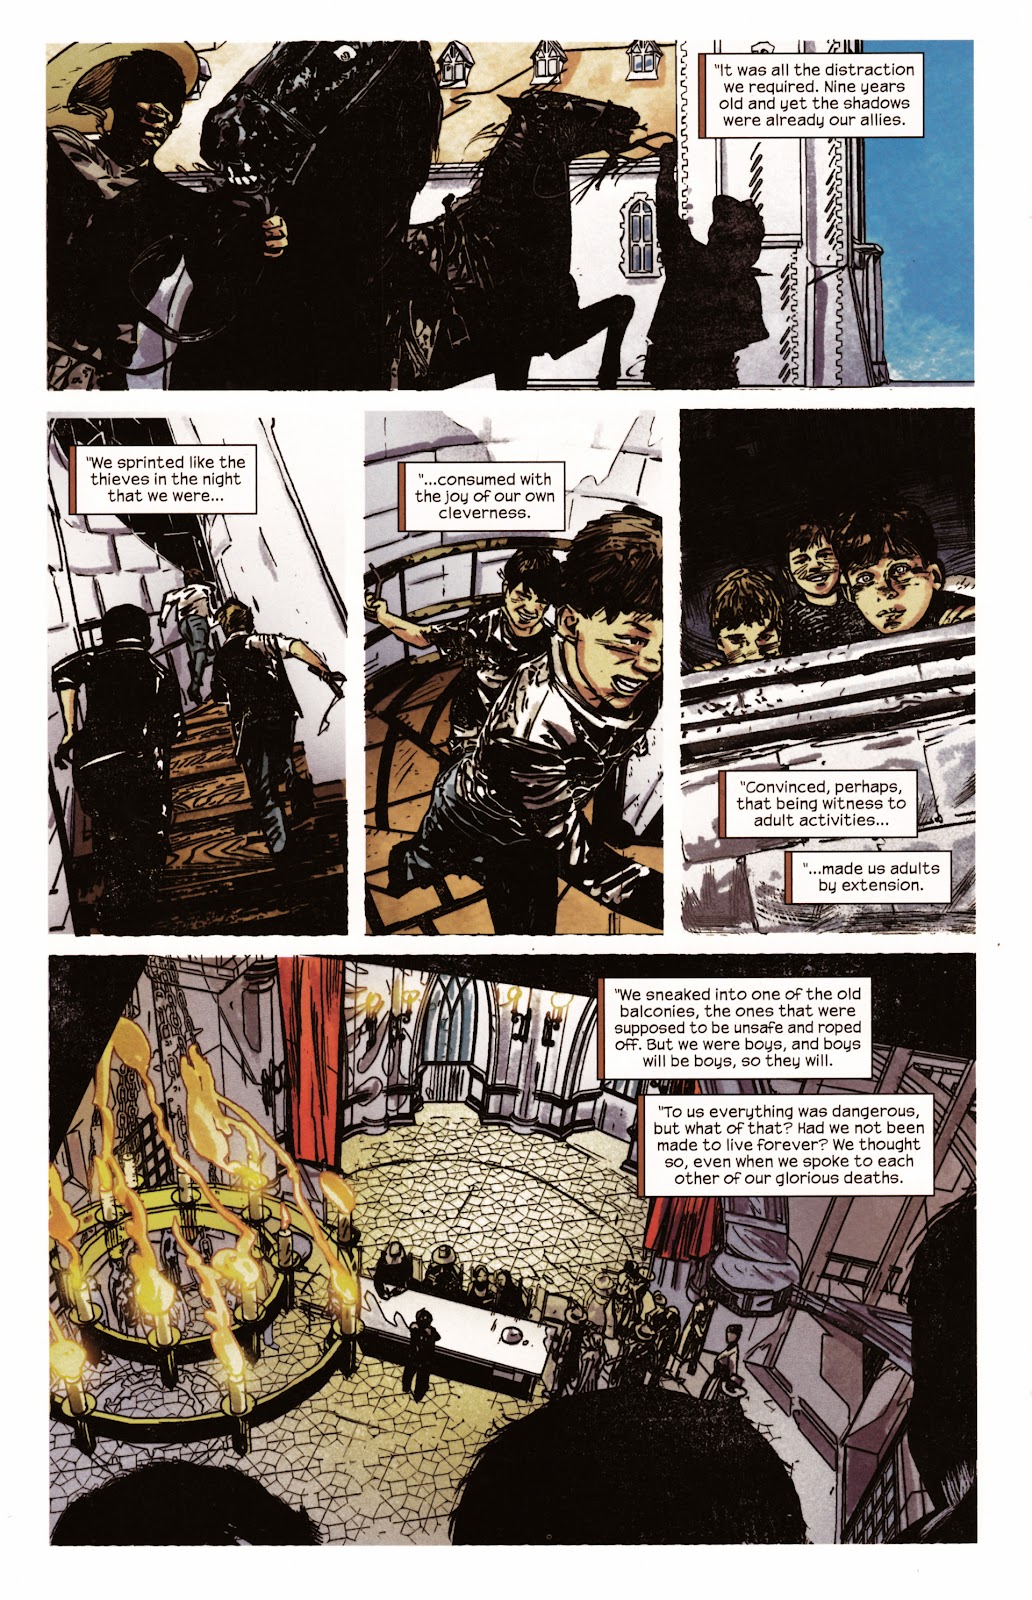 Dark Tower: The Gunslinger - The Man in Black issue 2 - Page 17